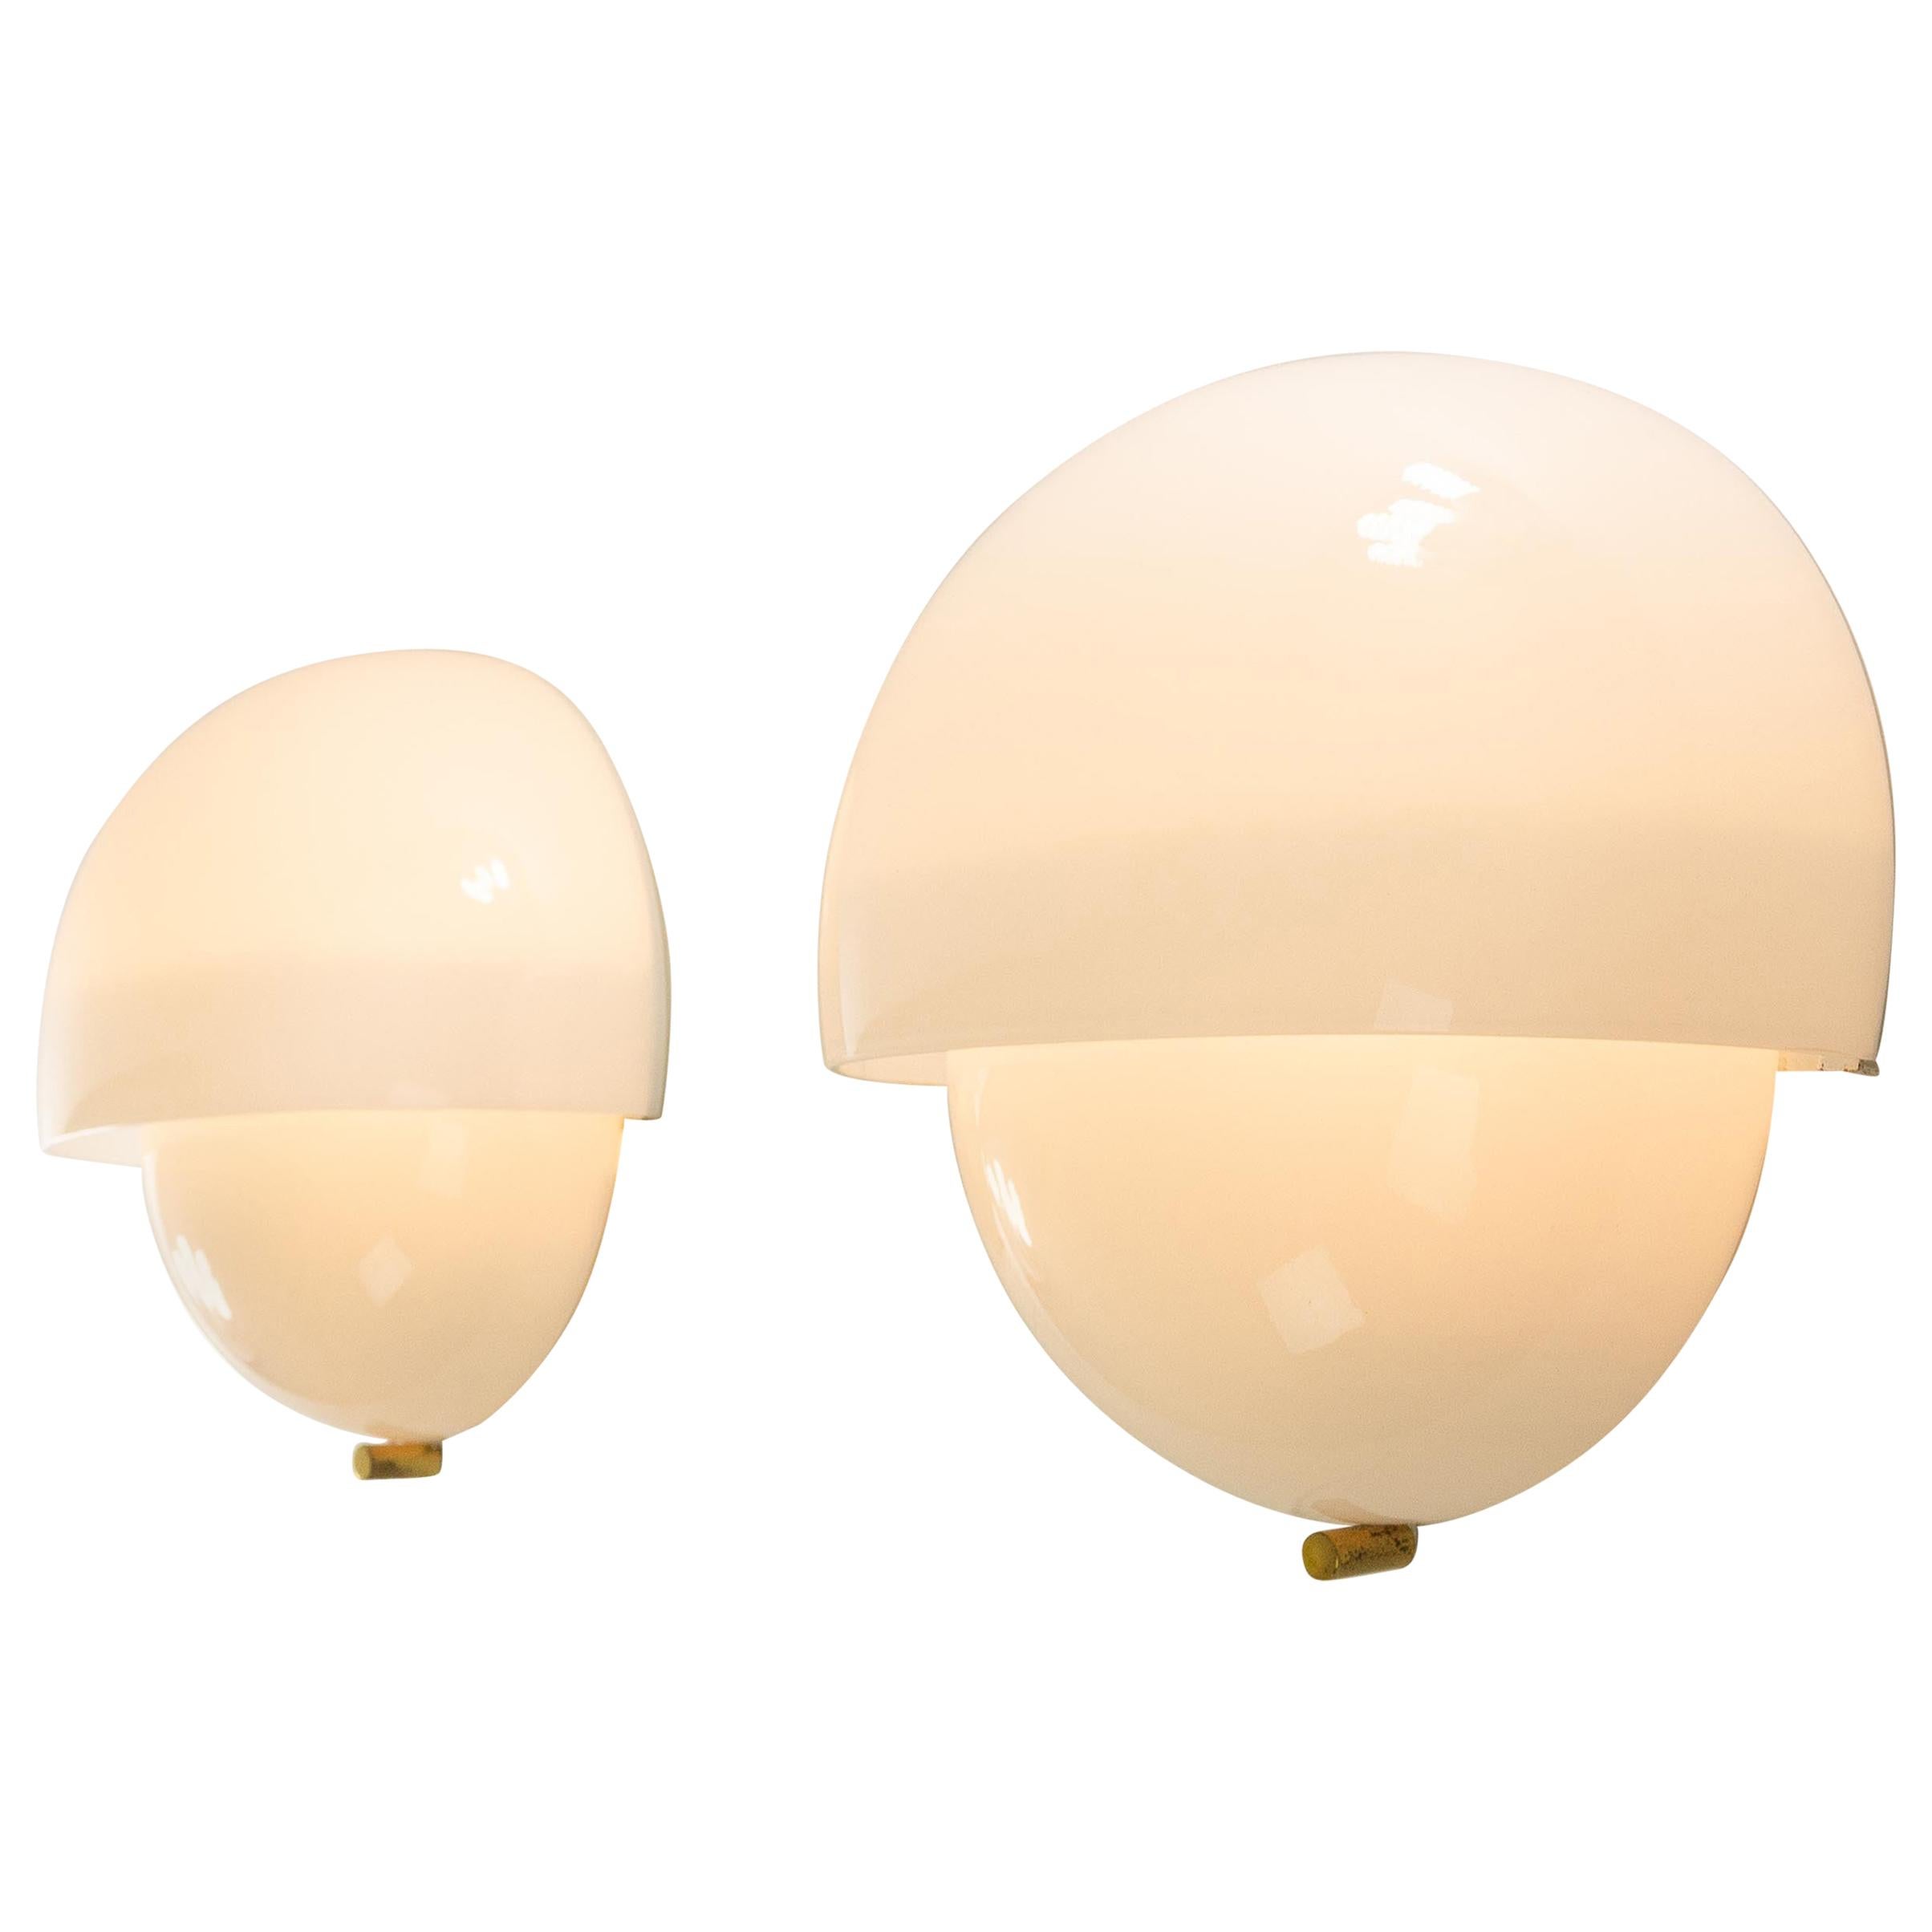 Pair of Grande Mania Wall Lamps by Vico Magistretti for Artemide, 1960s